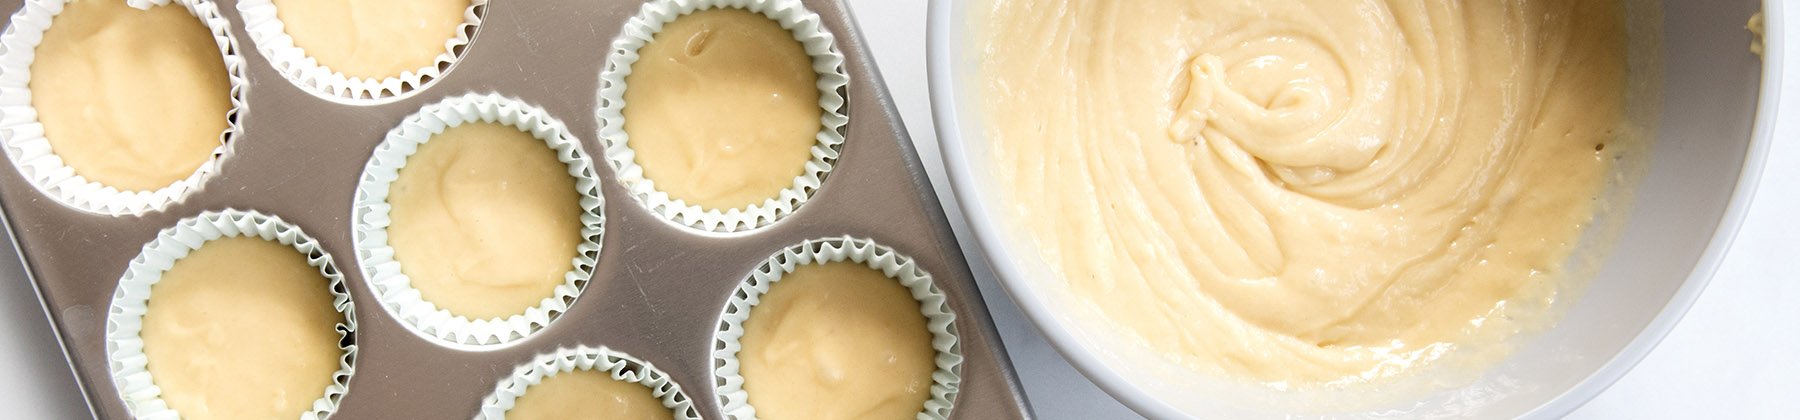 Photo of muffin batter in a muffin pan.